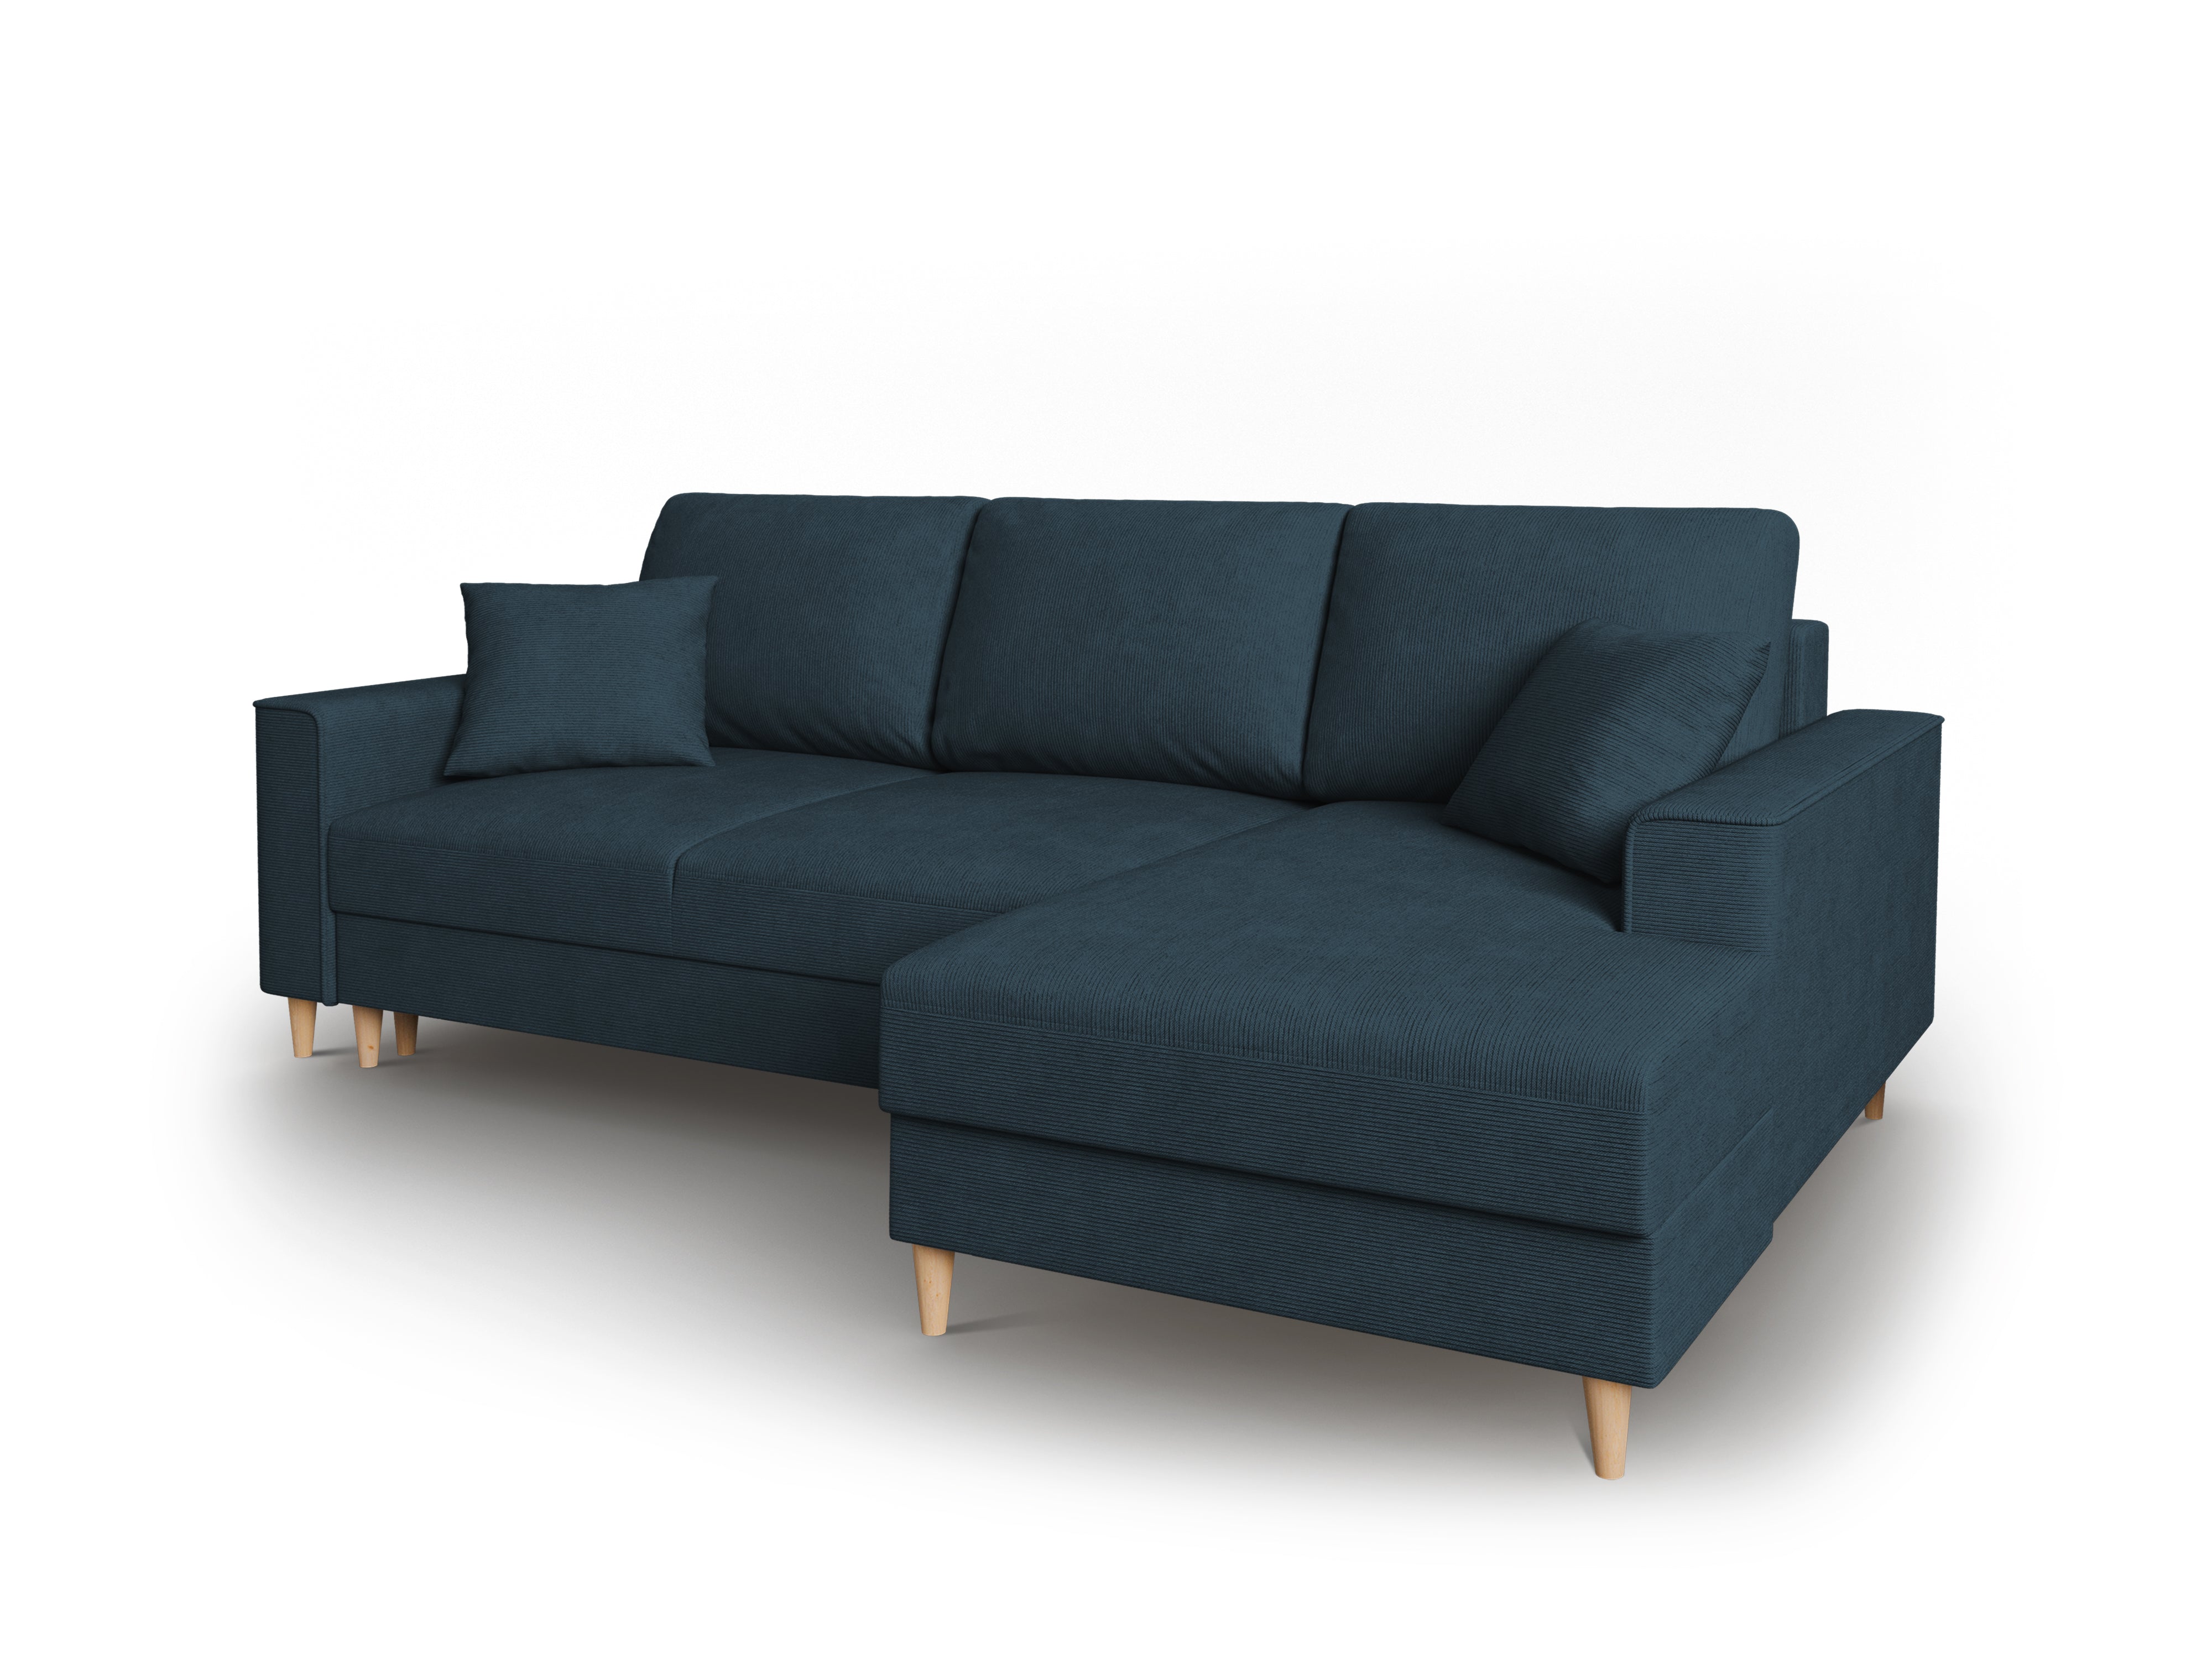 Right Corner Sofa With Bed Function And Box, "Cartadera", 4 Seats, 225x147x90
Made in Europe, Mazzini Sofas, Eye on Design